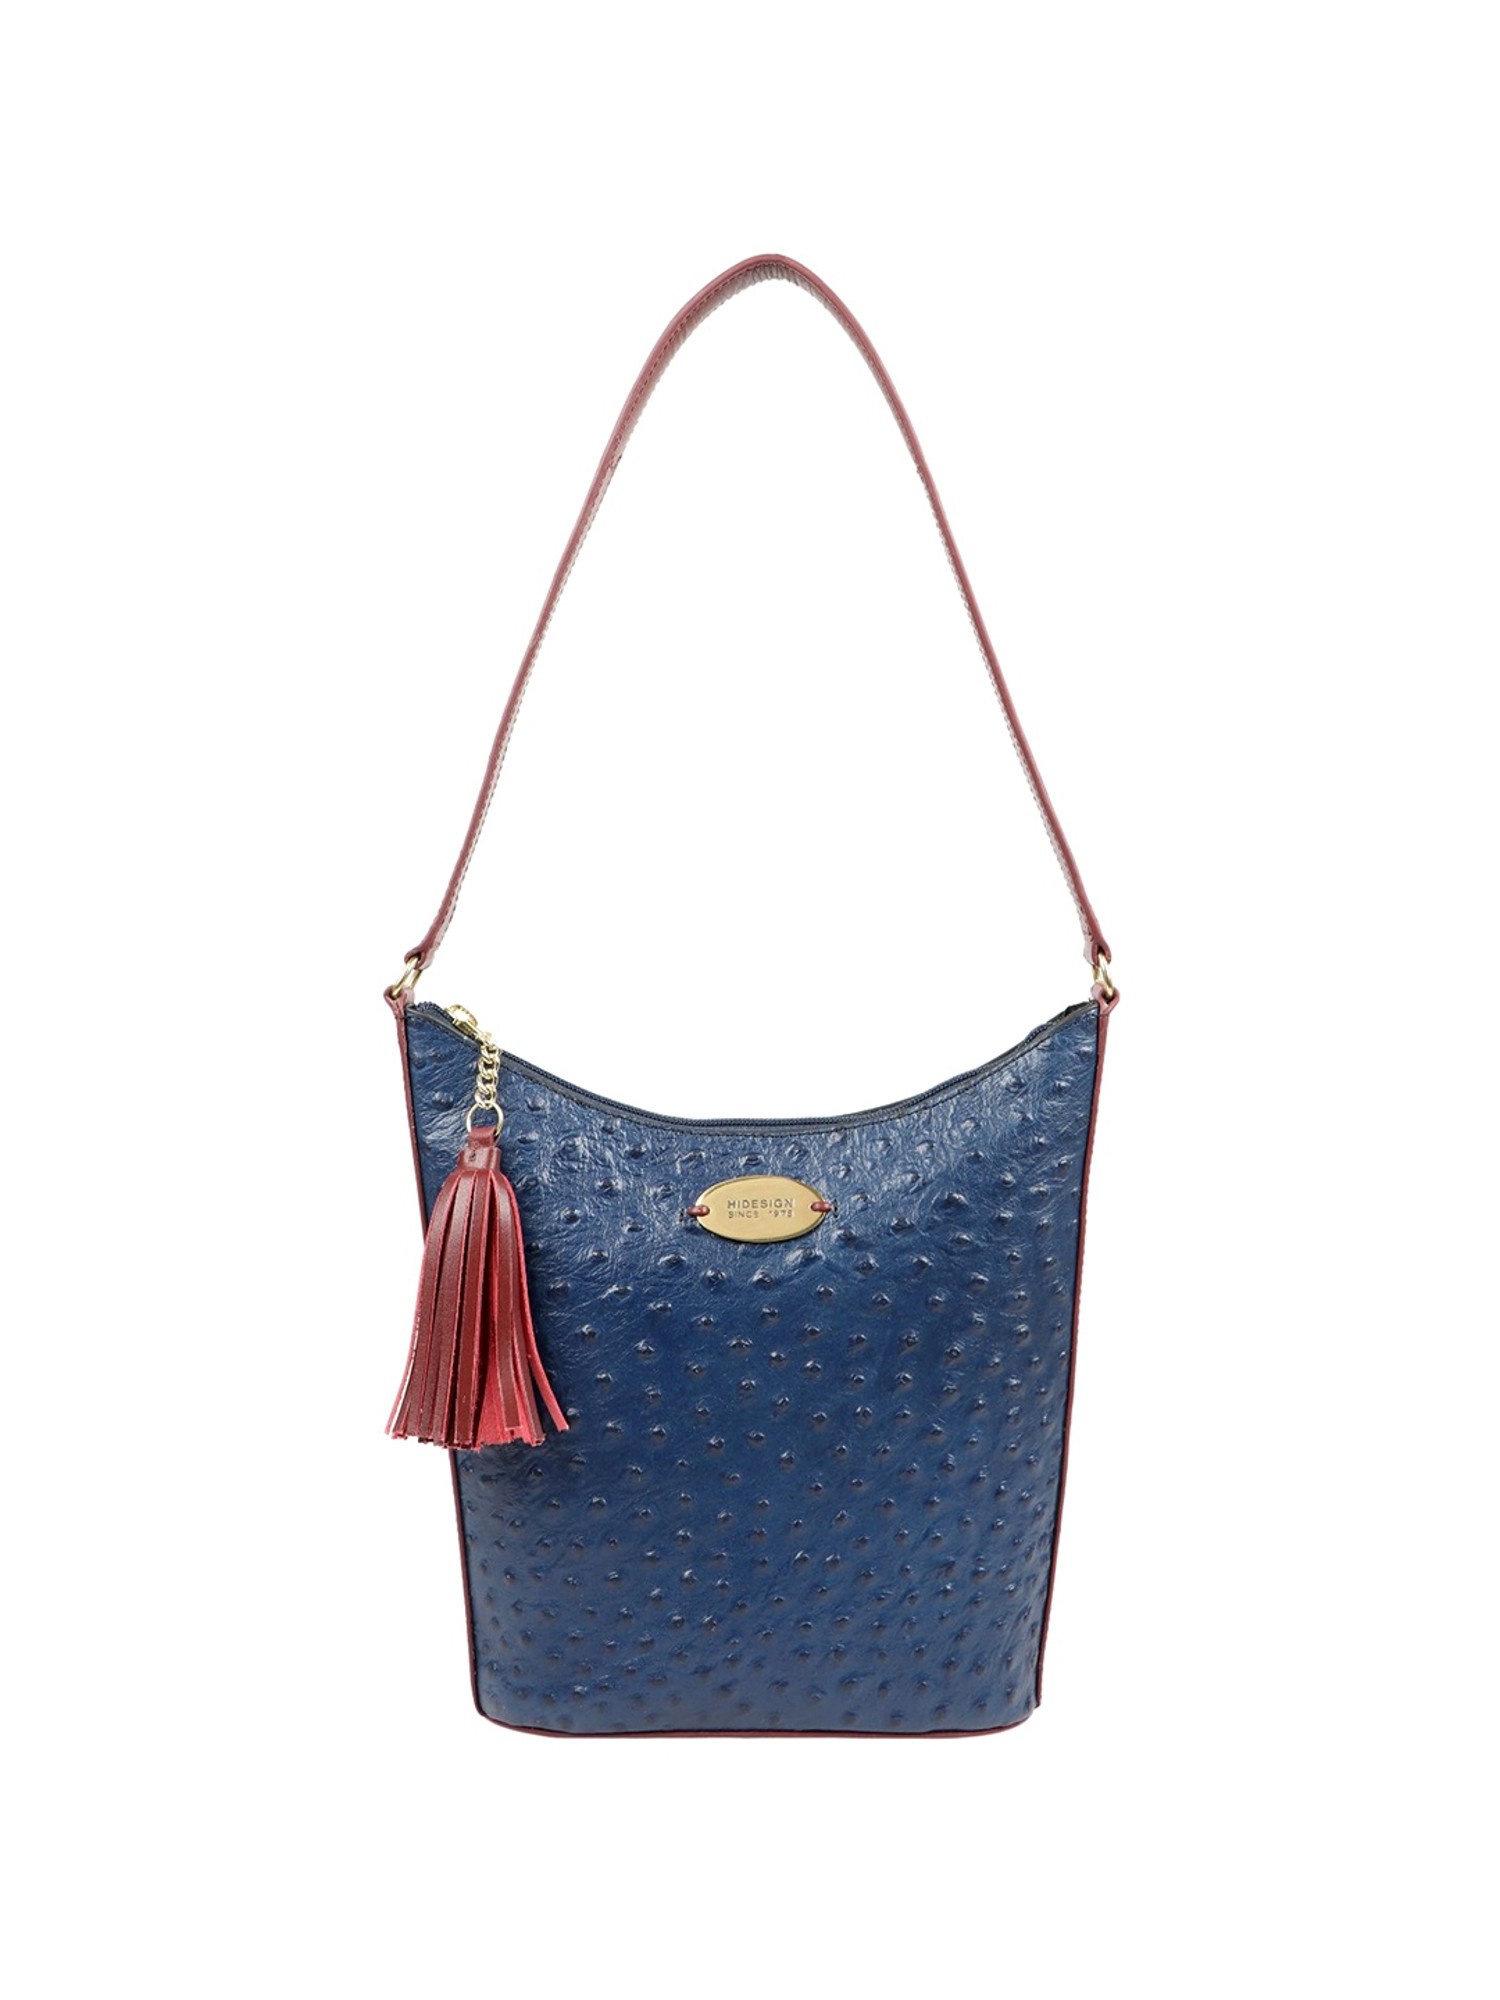 Hidesign Tote Bags outlet  Women  1800 products on sale  FASHIOLAcouk